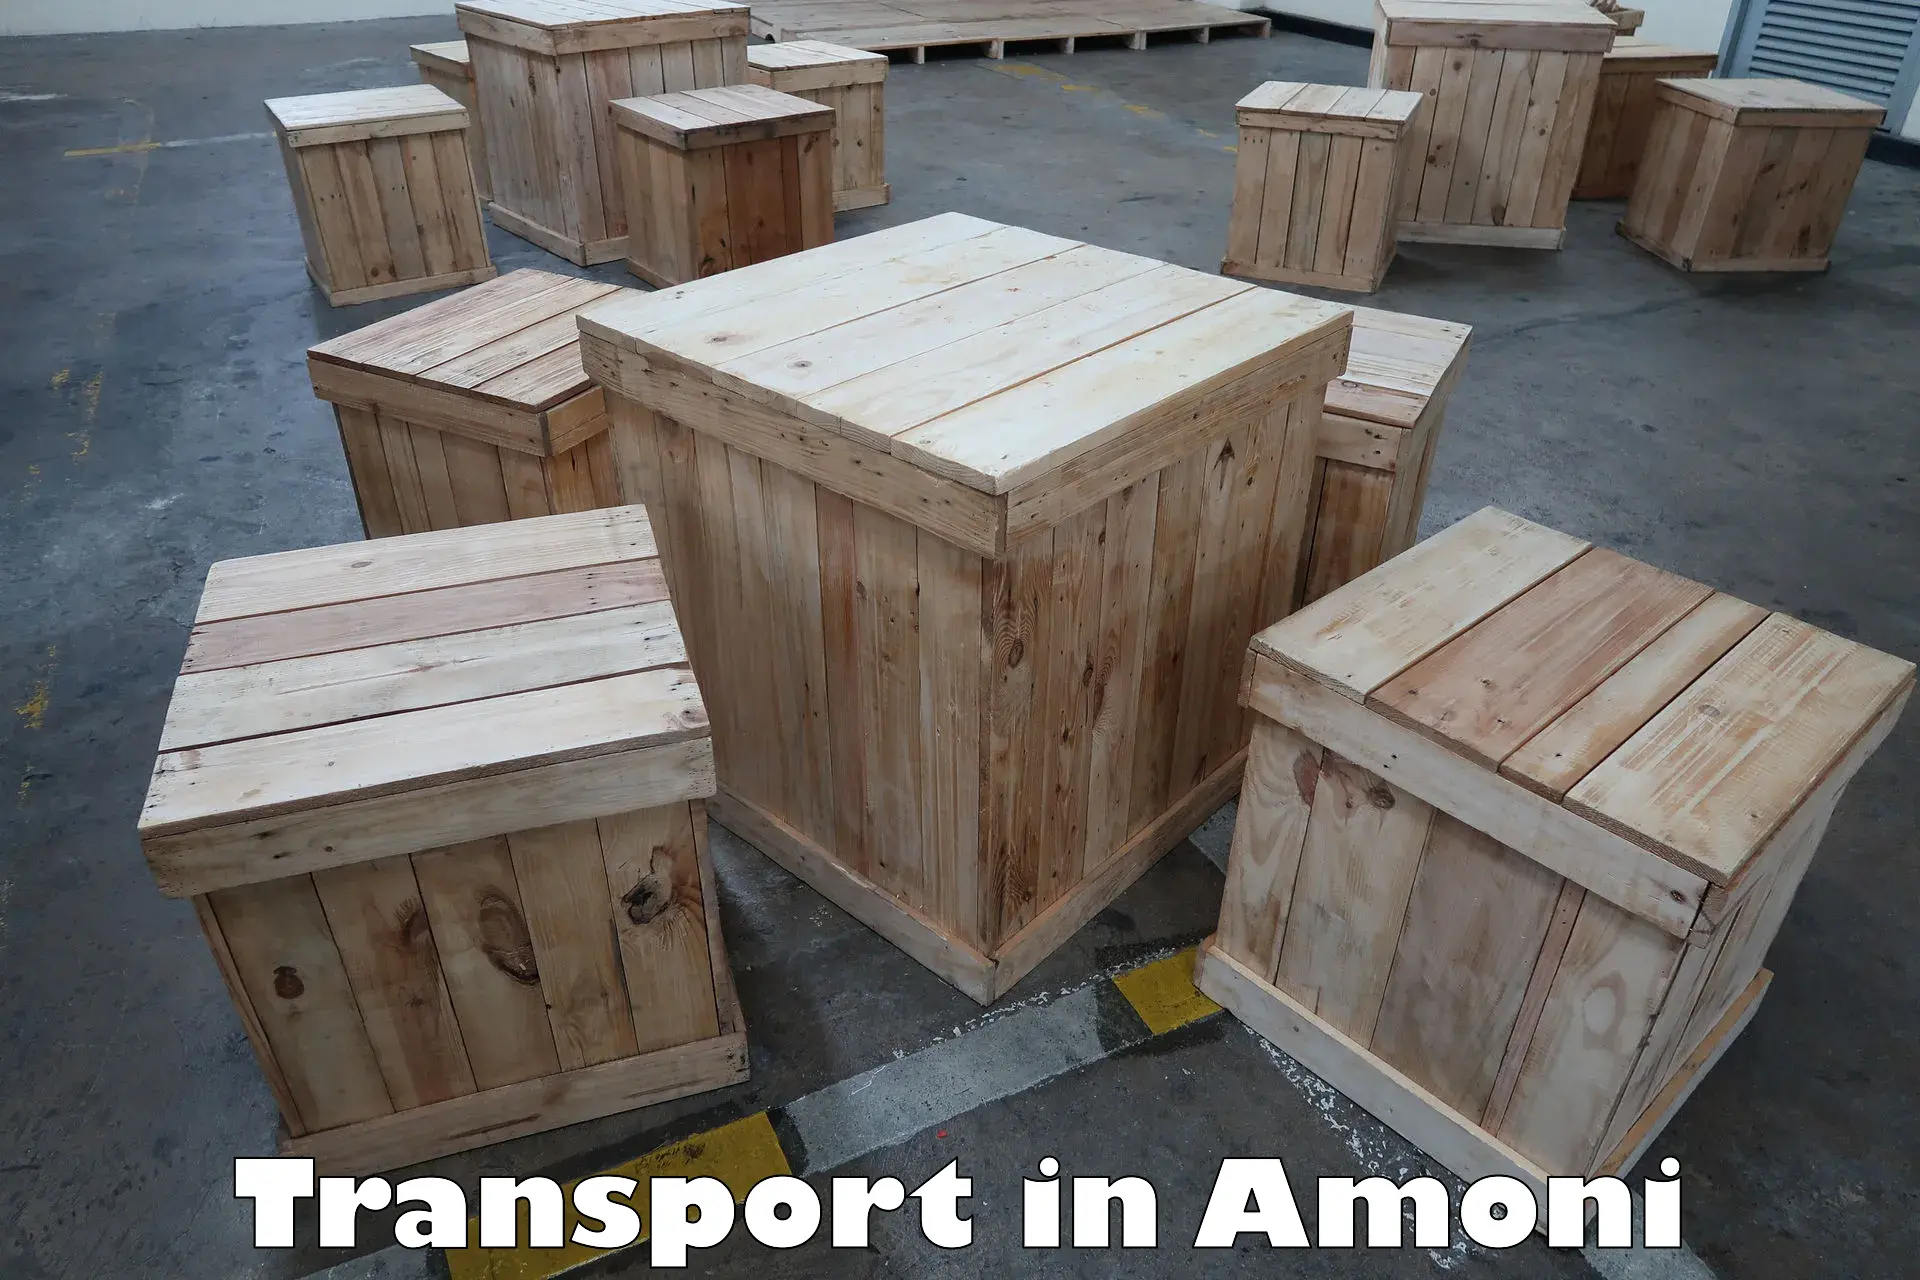 Luggage transport services in Amoni